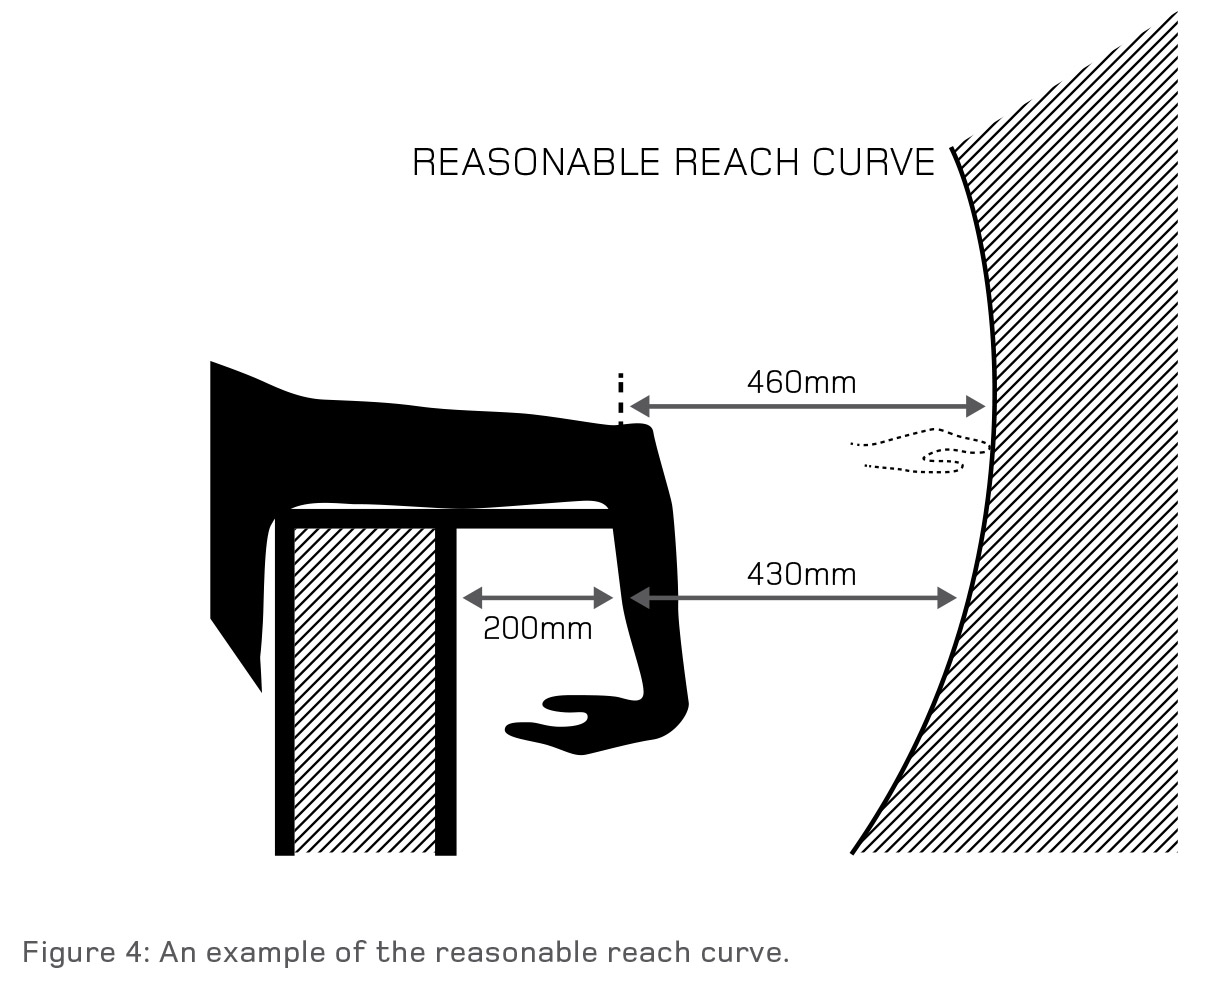 [image] Figure 4: An example of the reasonable reach curve